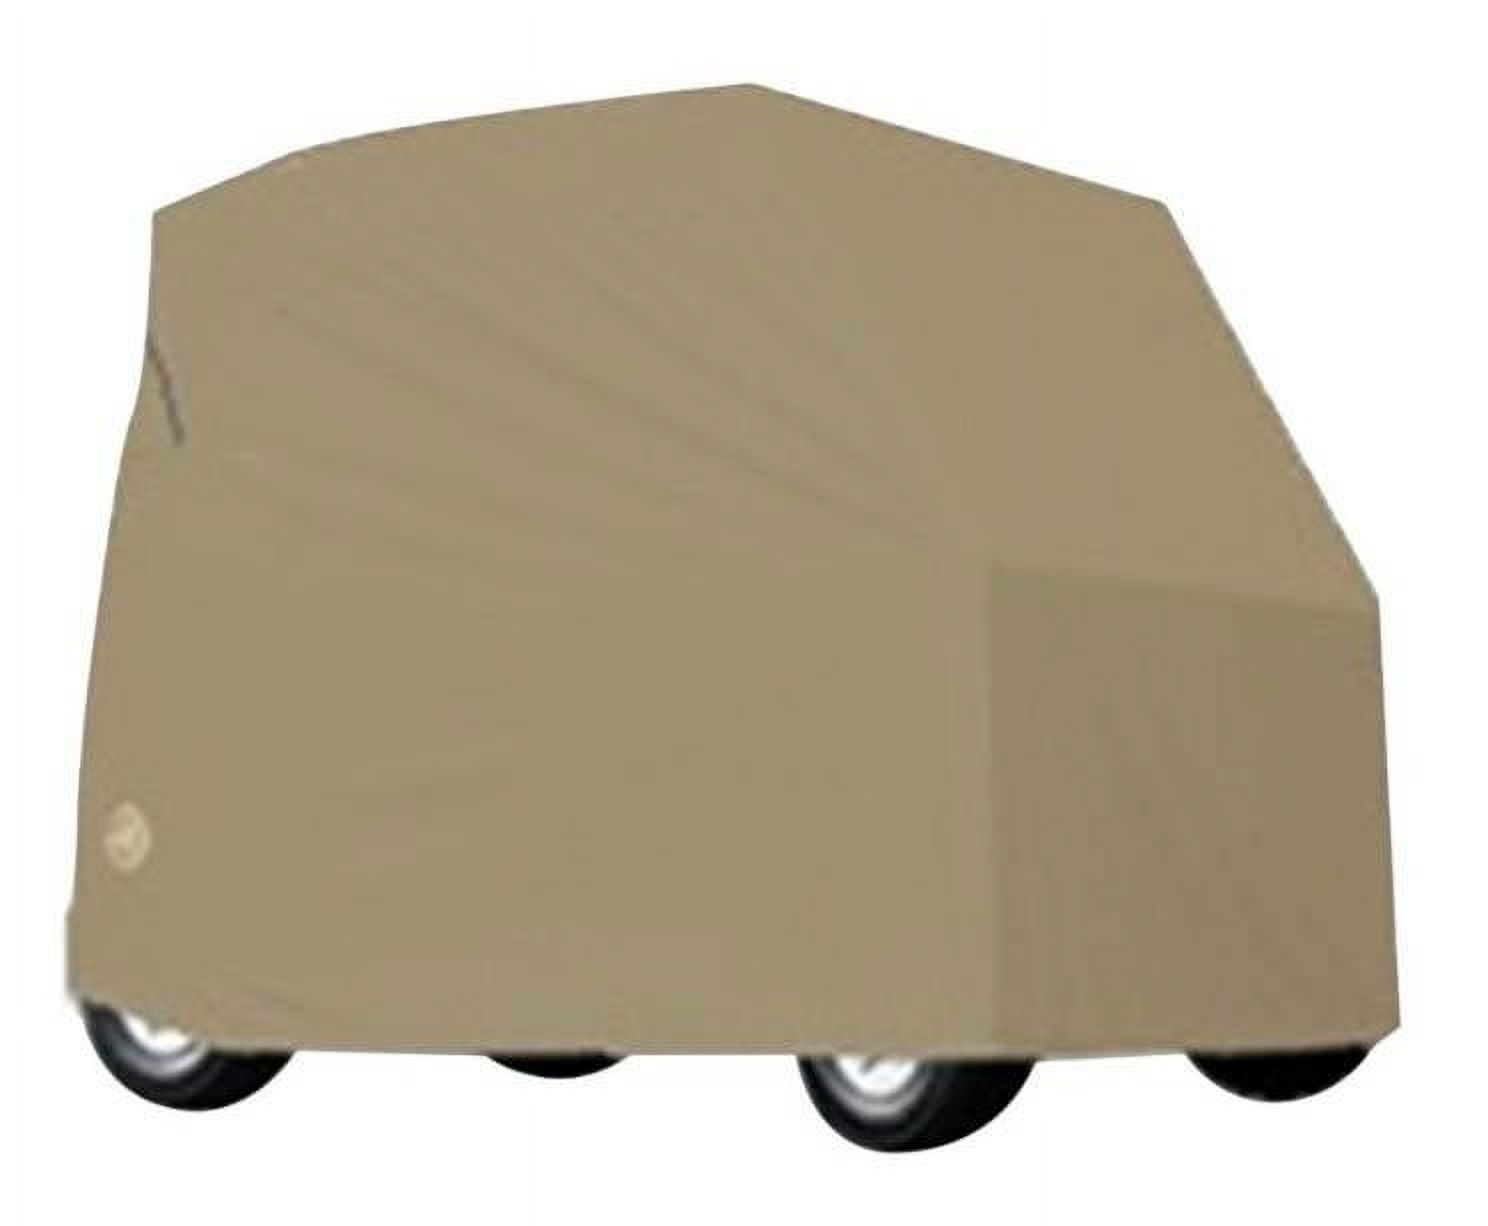 Greenline Yamaha Drive Golf Cart Storage Covers By Eevelle, 2 Passenger Slipon Fit, Tan - image 1 of 6